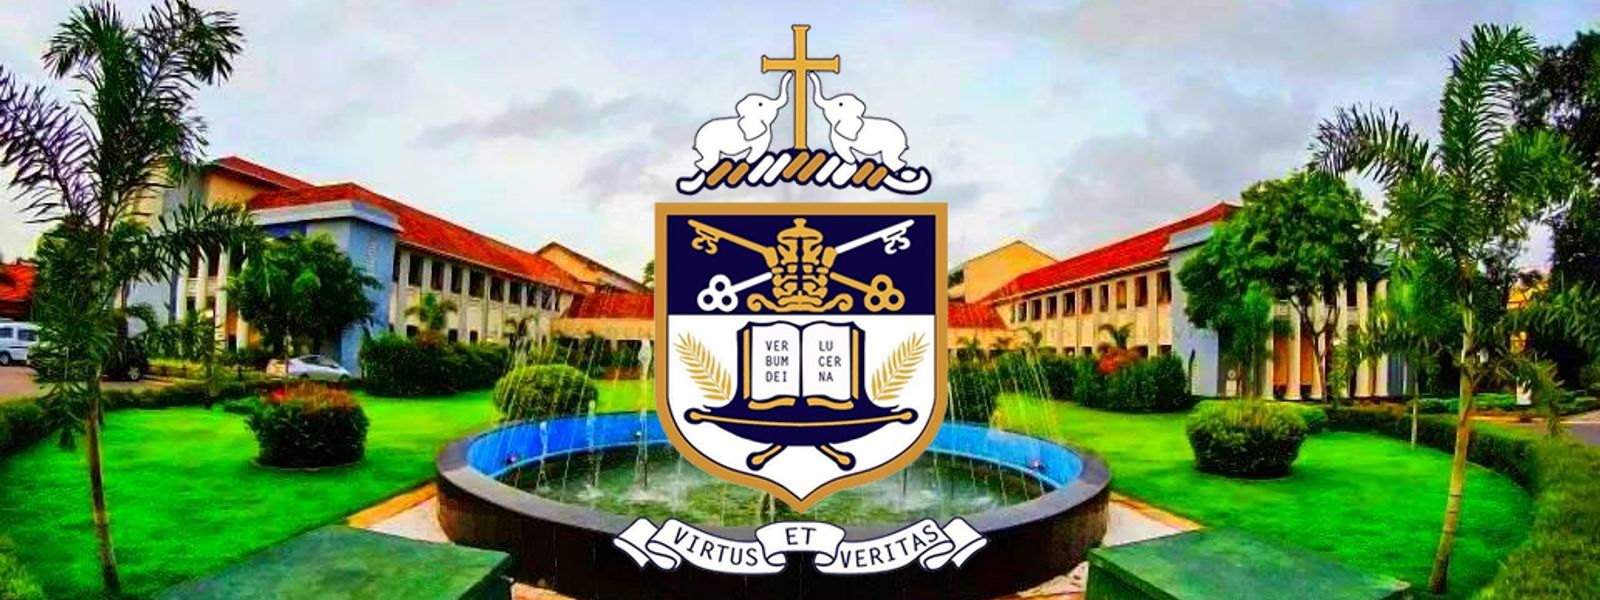 St. Peter’s College to celebrate 100 years in 2022; Centenary Logo unveiled